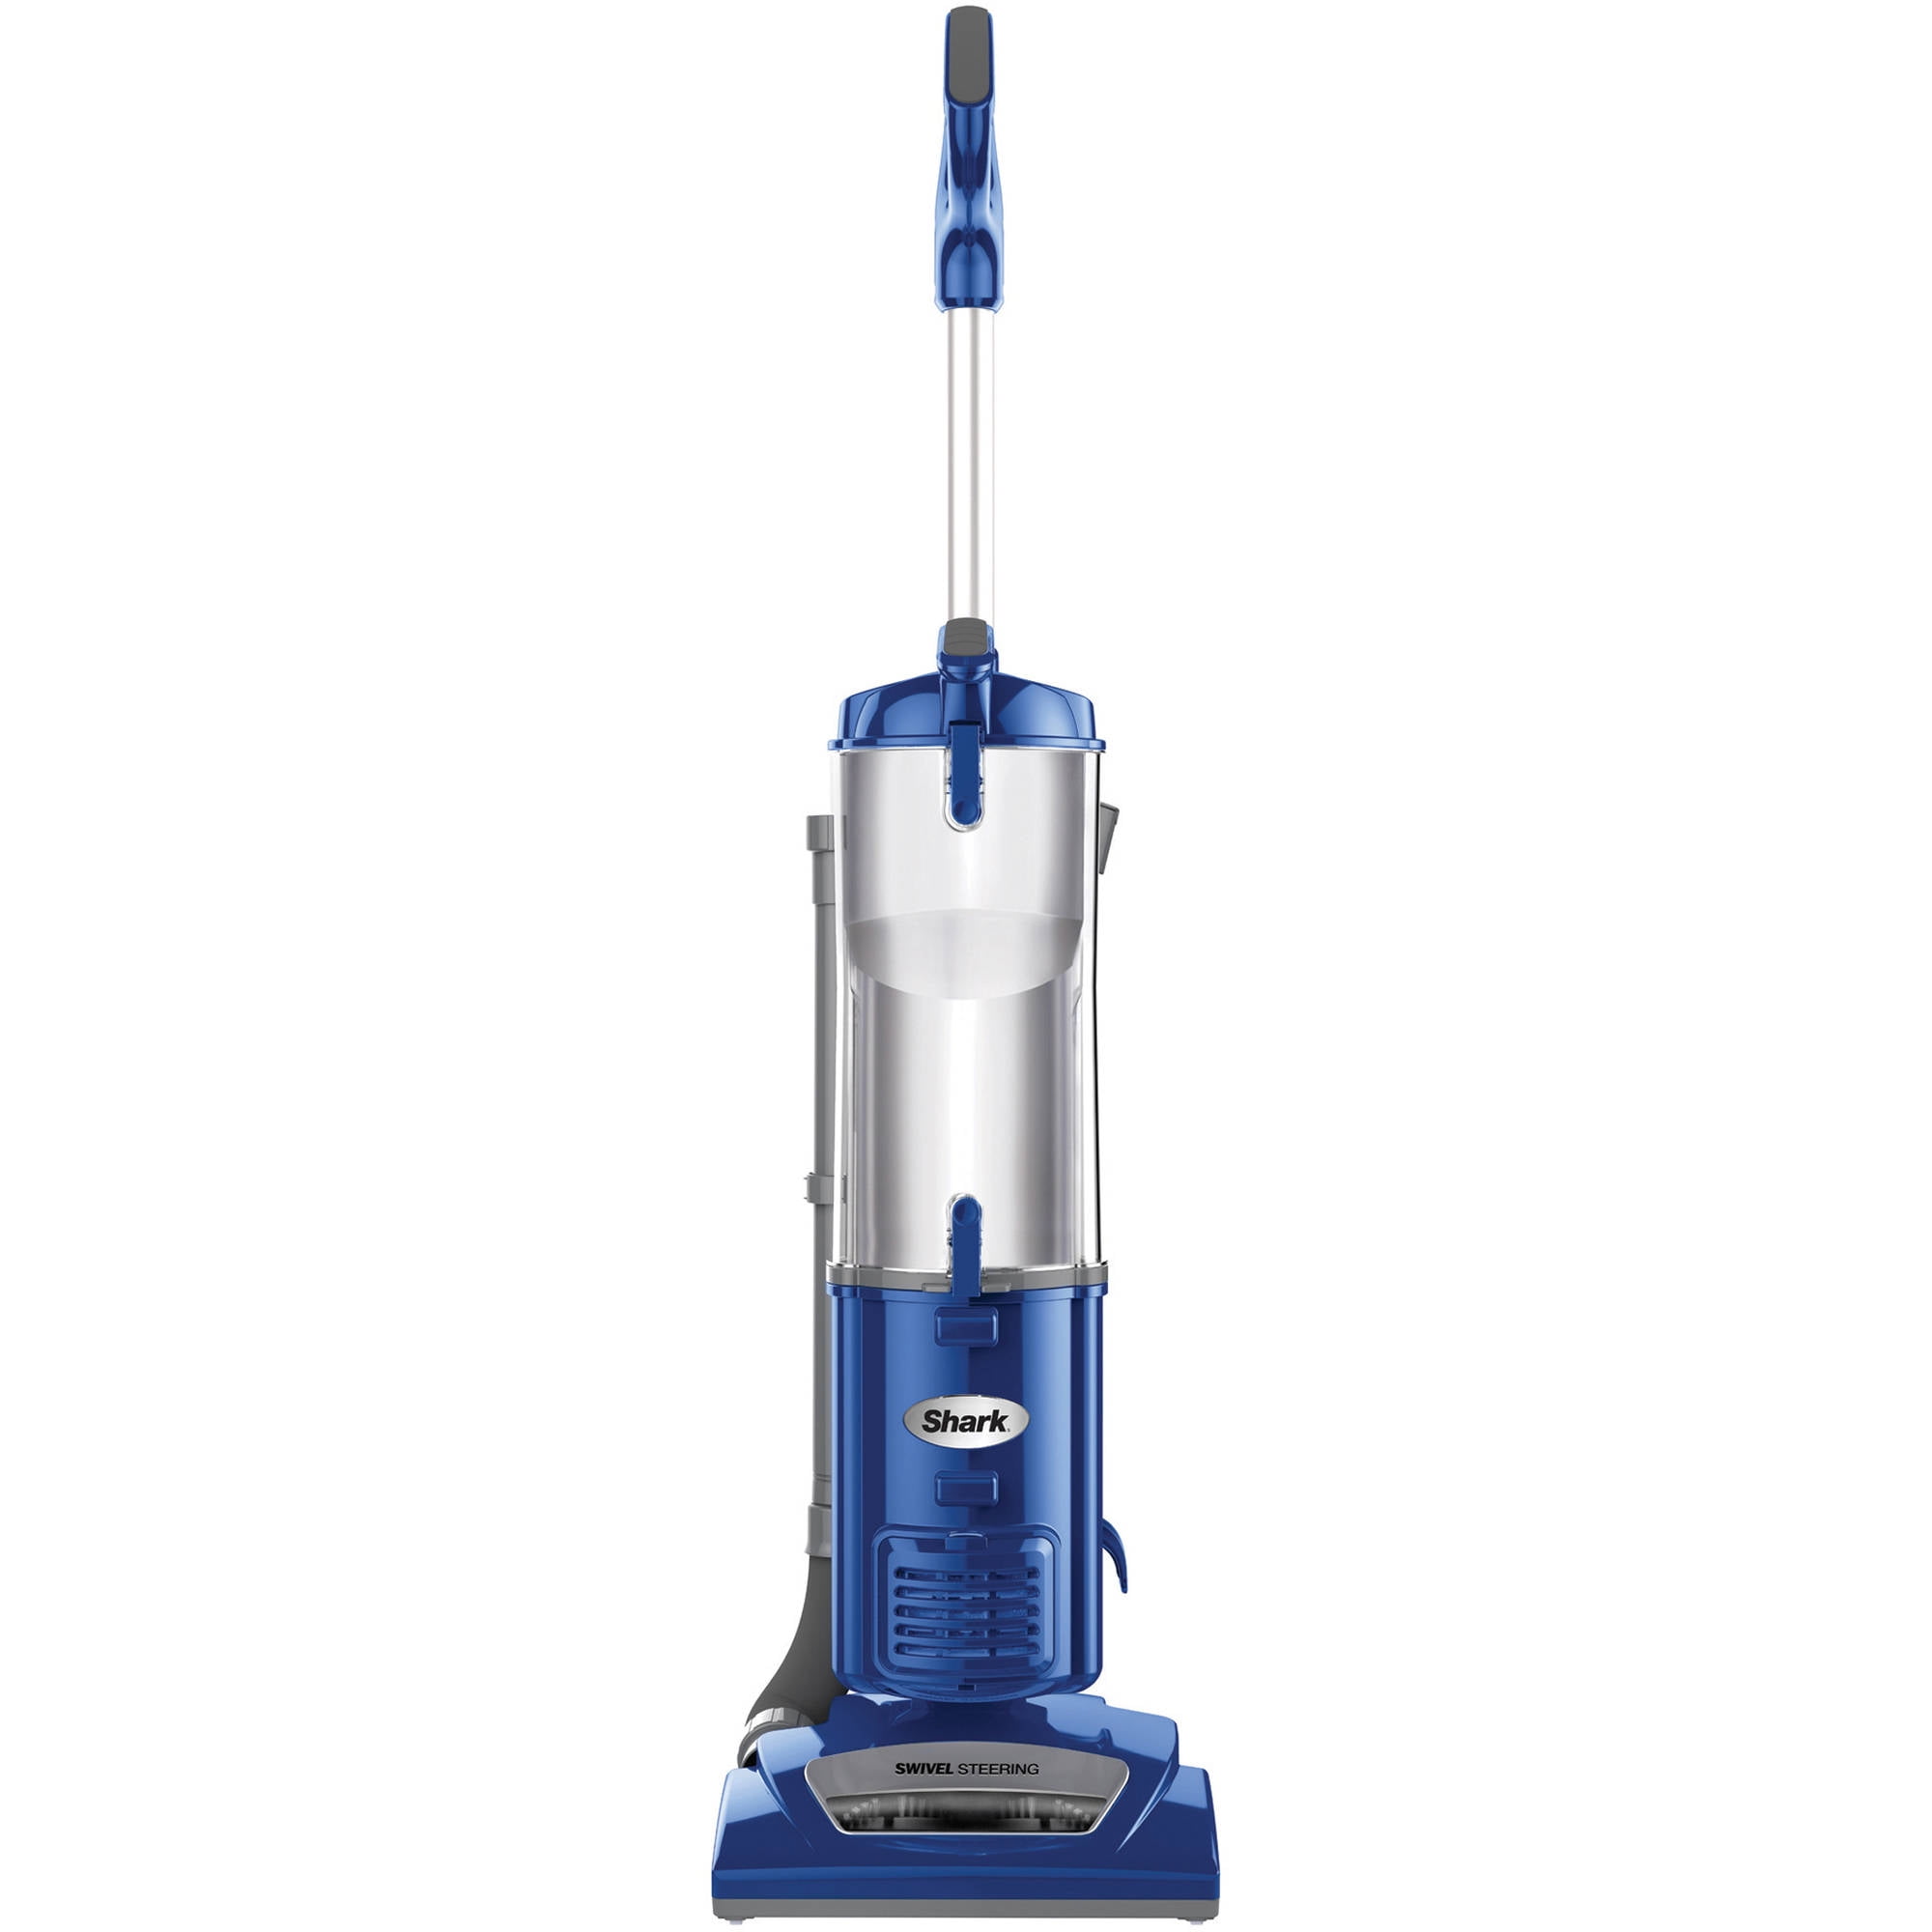 How do you submit a warranty claim for a Shark vacuum?